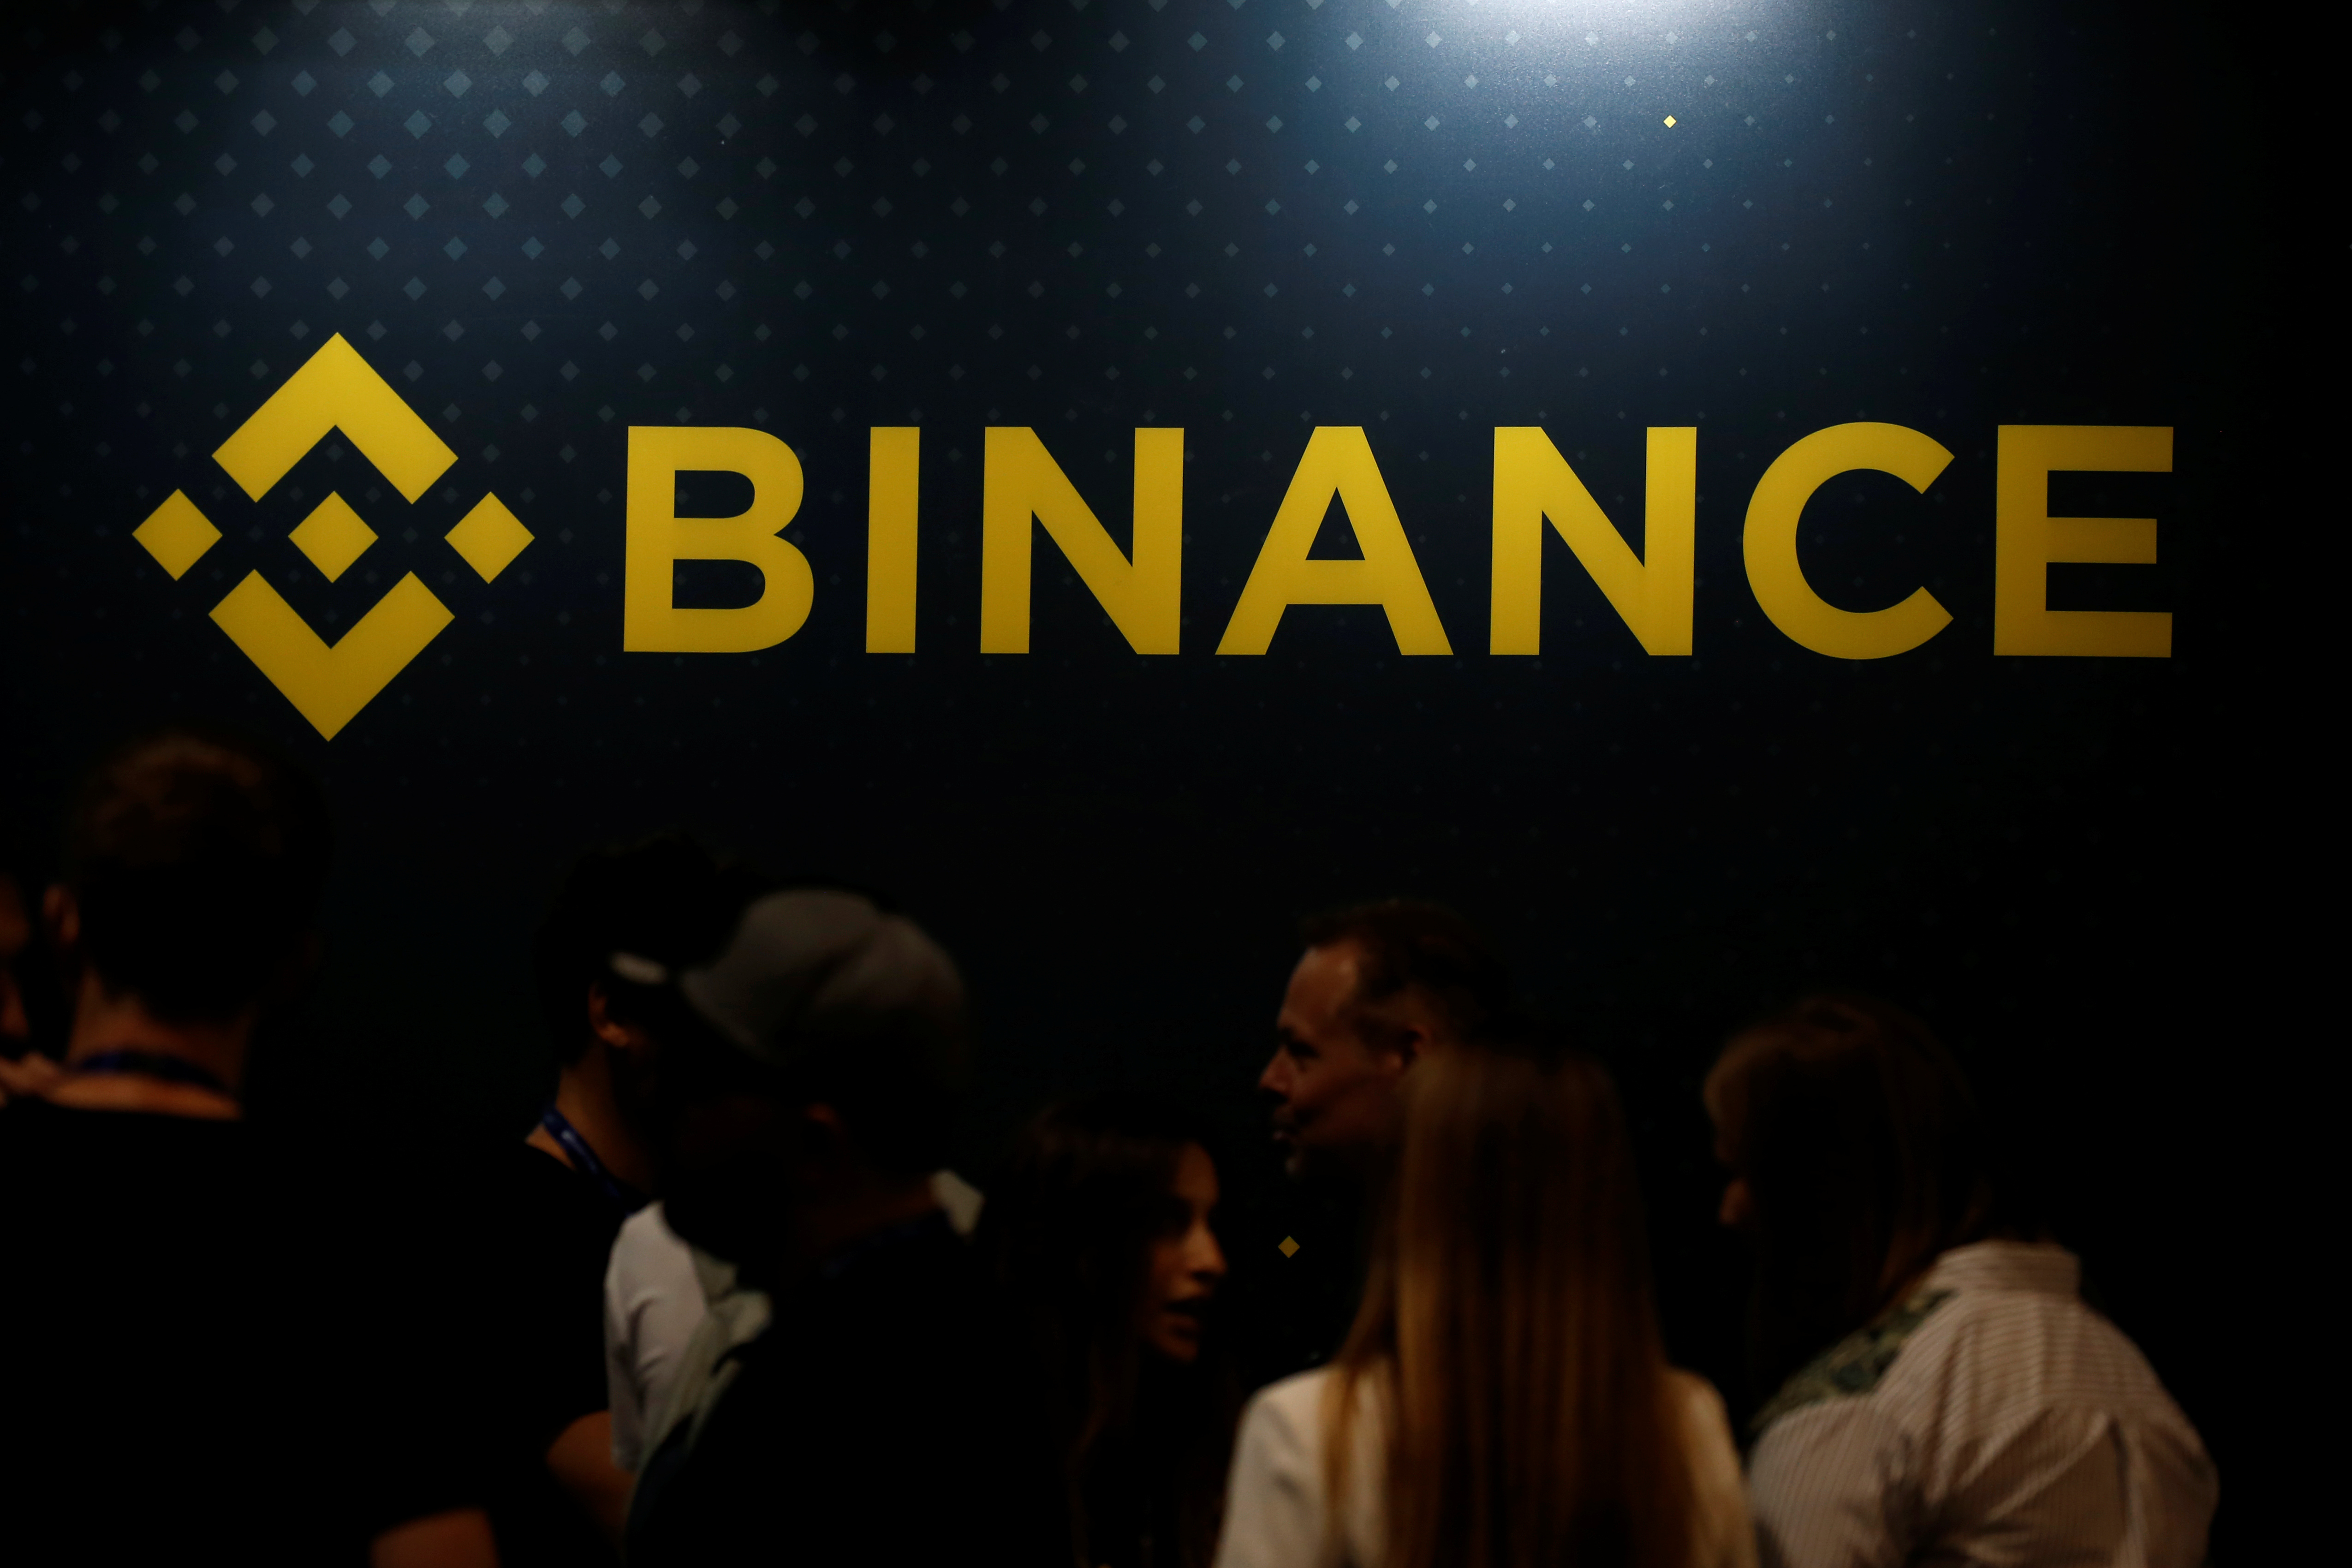 The logo of Binance is seen on their exhibition stand at the Delta Summit, Malta's official Blockchain and Digital Innovation event promoting cryptocurrency, in Ta' Qali